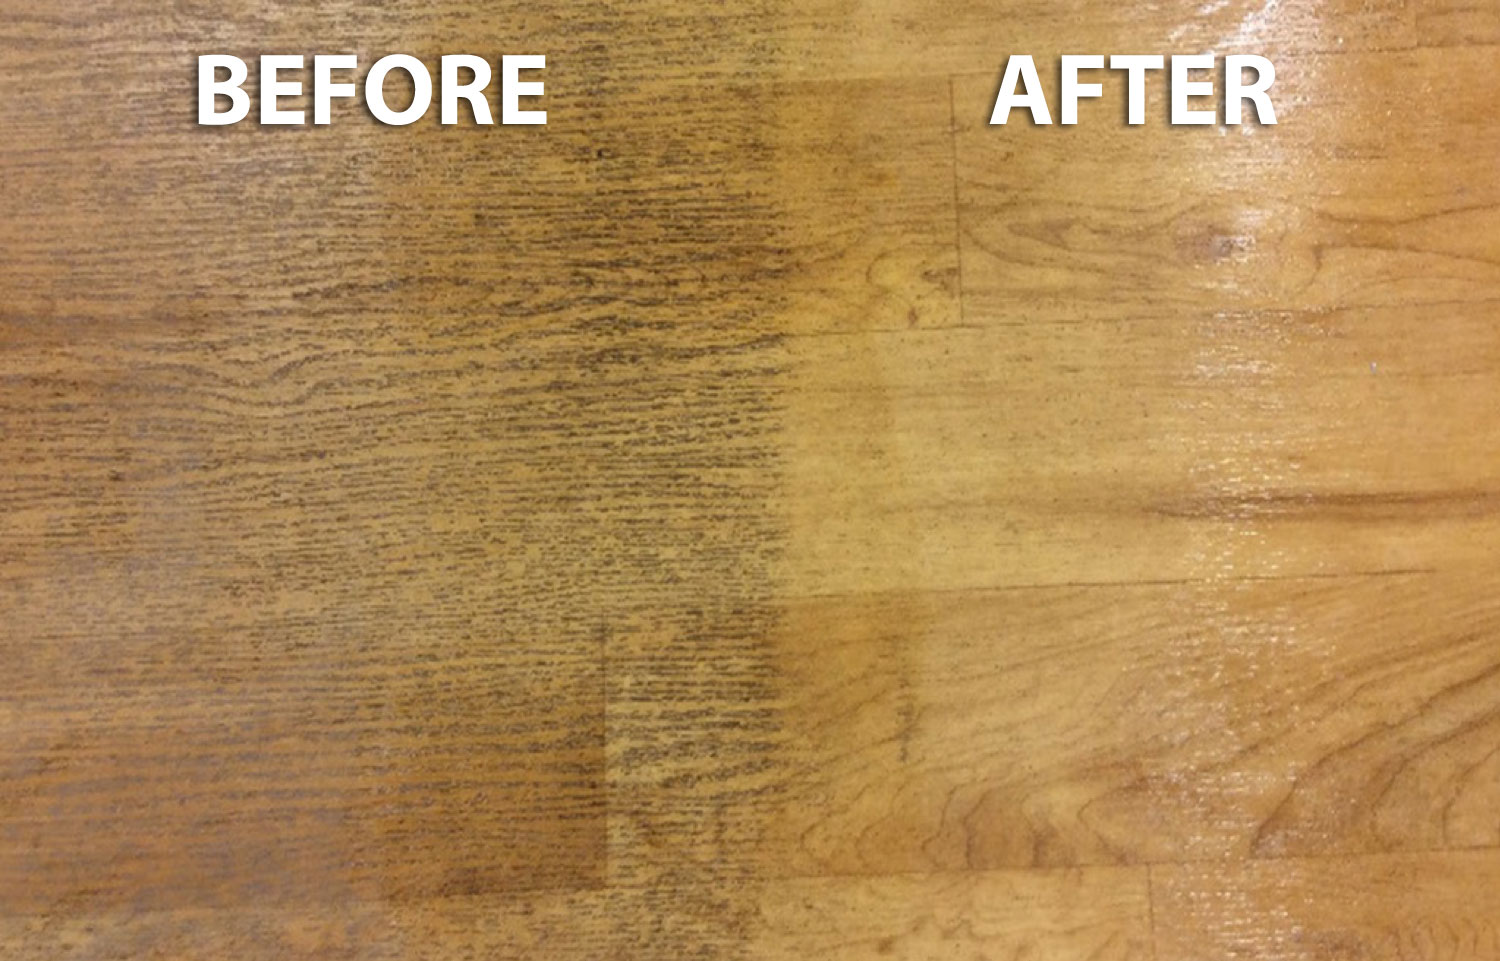 Clean That Up  How to Clean Luxury Vinyl Plank (LVP)